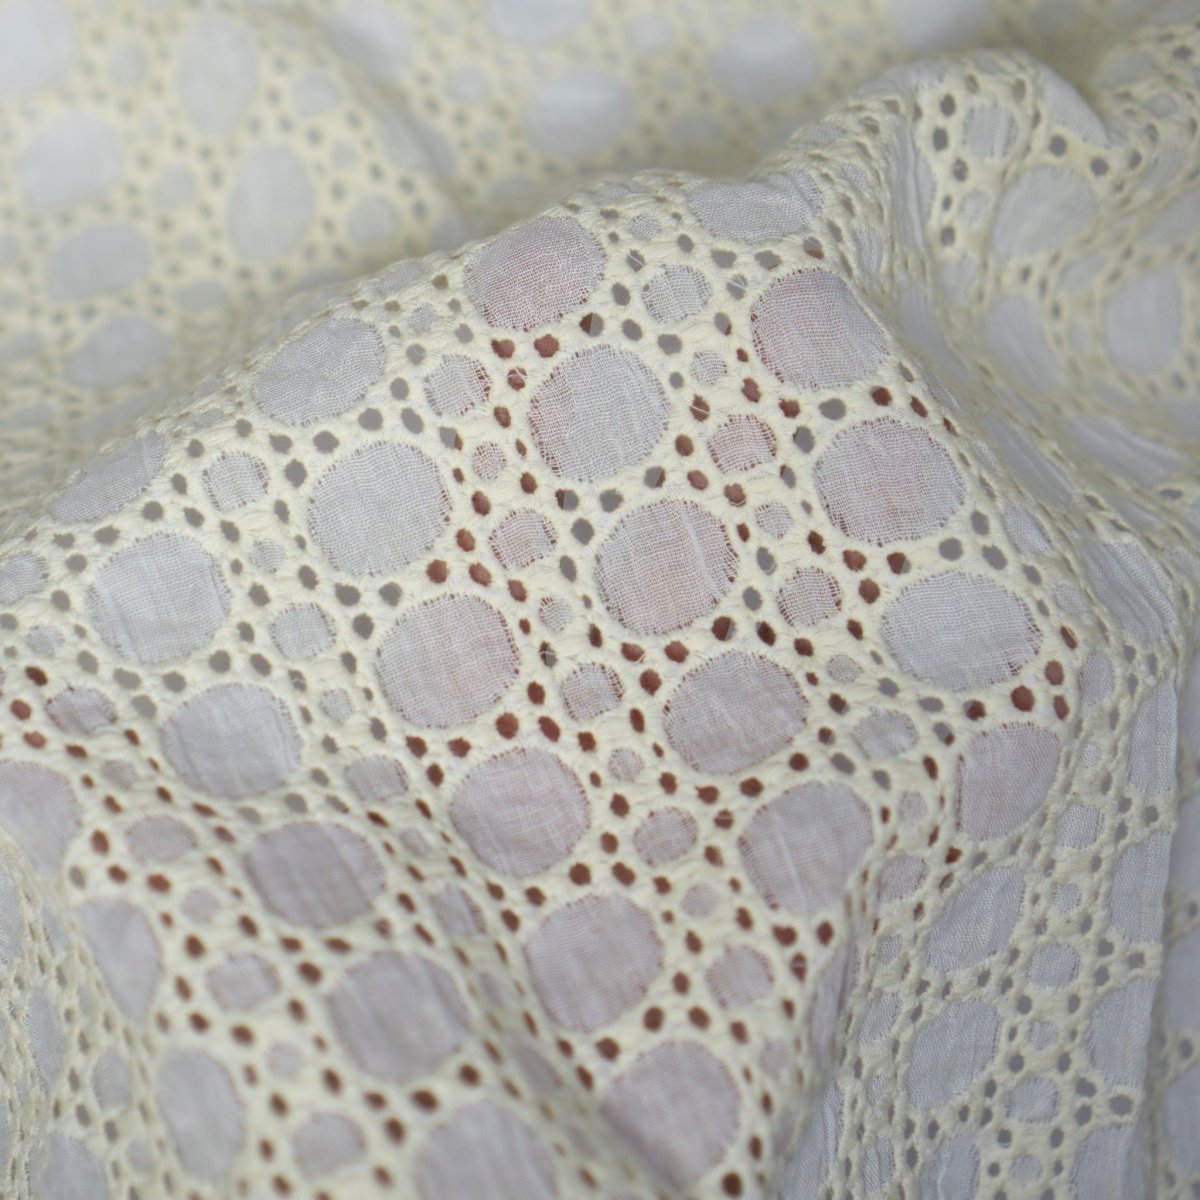 REMNANT - Embroidered Cotton - Cream Circles - 68% Cotton 32% Polyester - 50cm